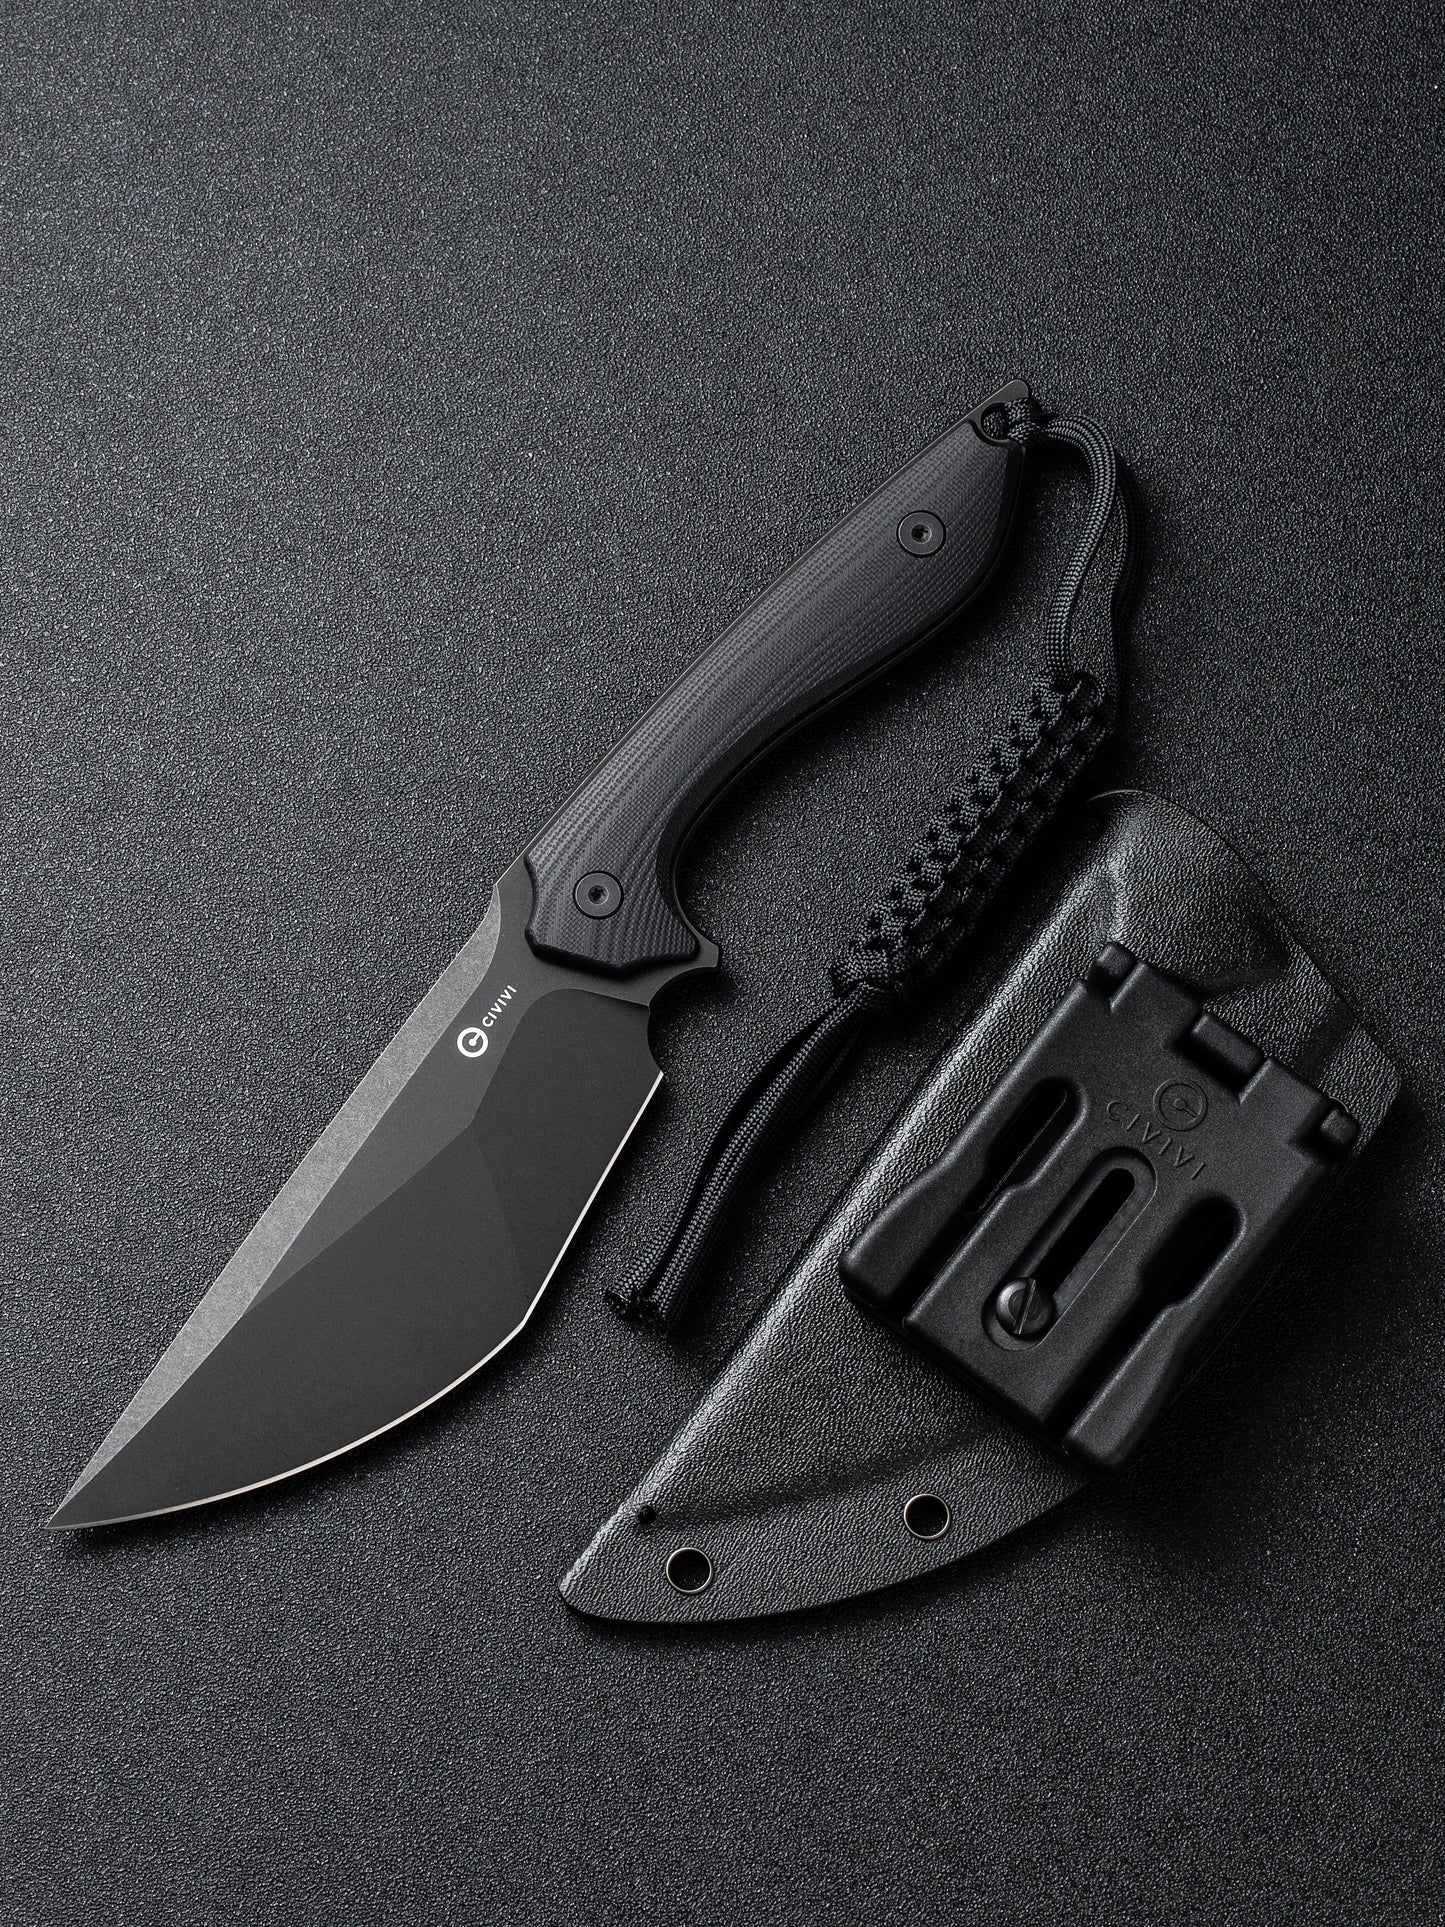 Civivi Concept 22 4.88" D2 Black G10 Fixed Blade Knife by Tuffknives C21047-1